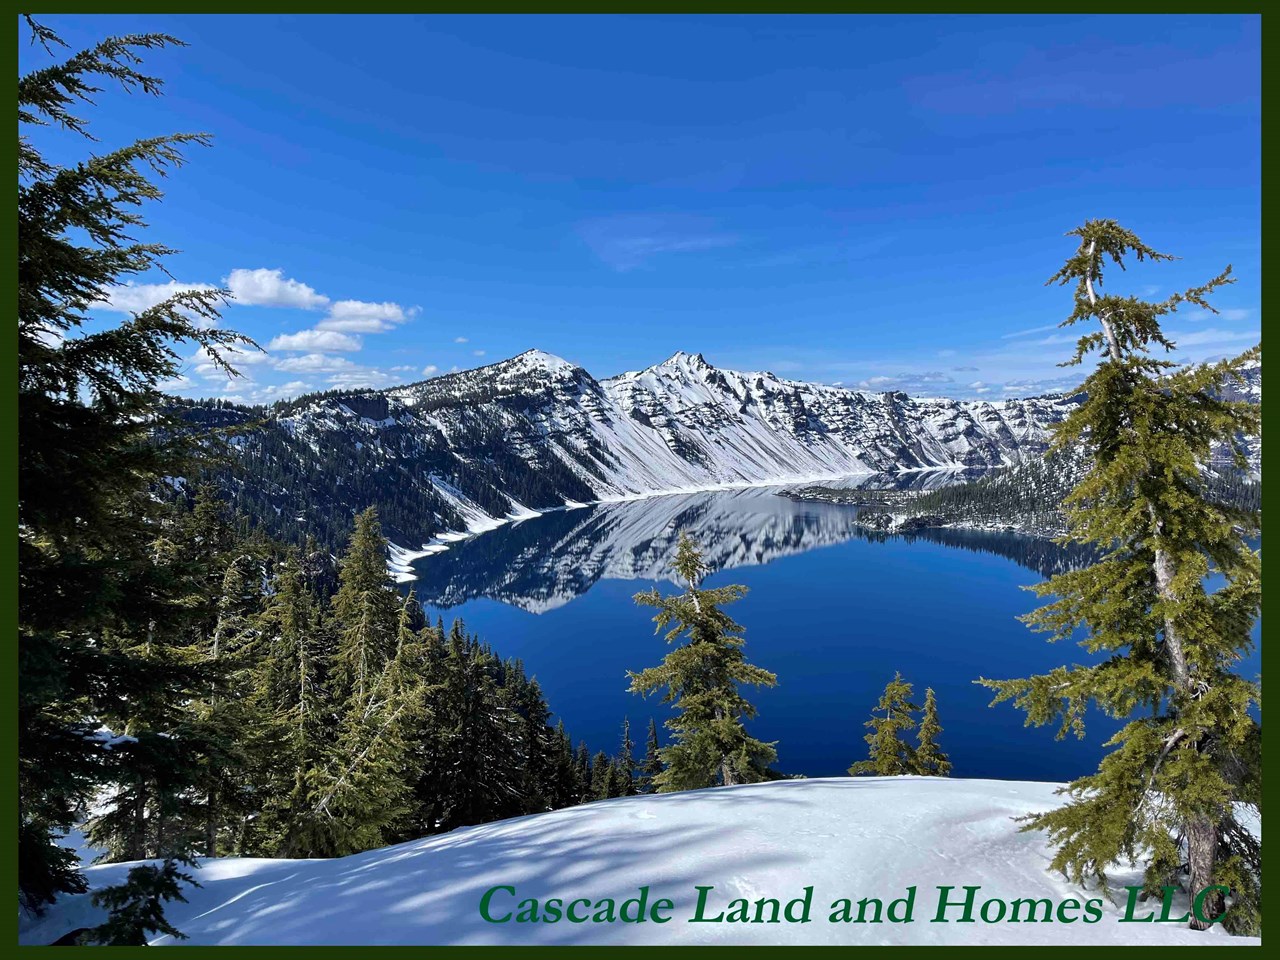 crater lake national park is about an hour away and is oregon’s only national park! crater lake is fed from rain and snow melt and is amazingly clear. at 1,949 feet deep, it is the deepest lake in the nation and is absolutely breathtaking! the entire park is unbelievably beautiful!